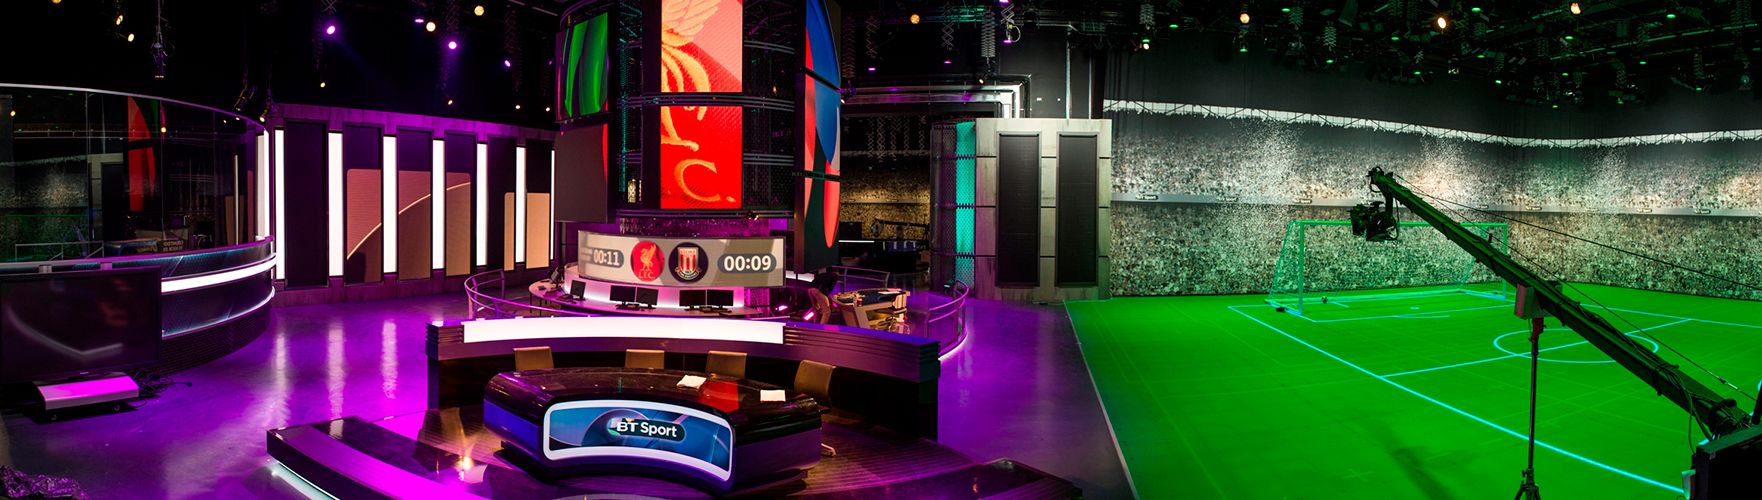 bt sport challenges sky sports dominance with huge studio ground breaking tech and social media integration image 6